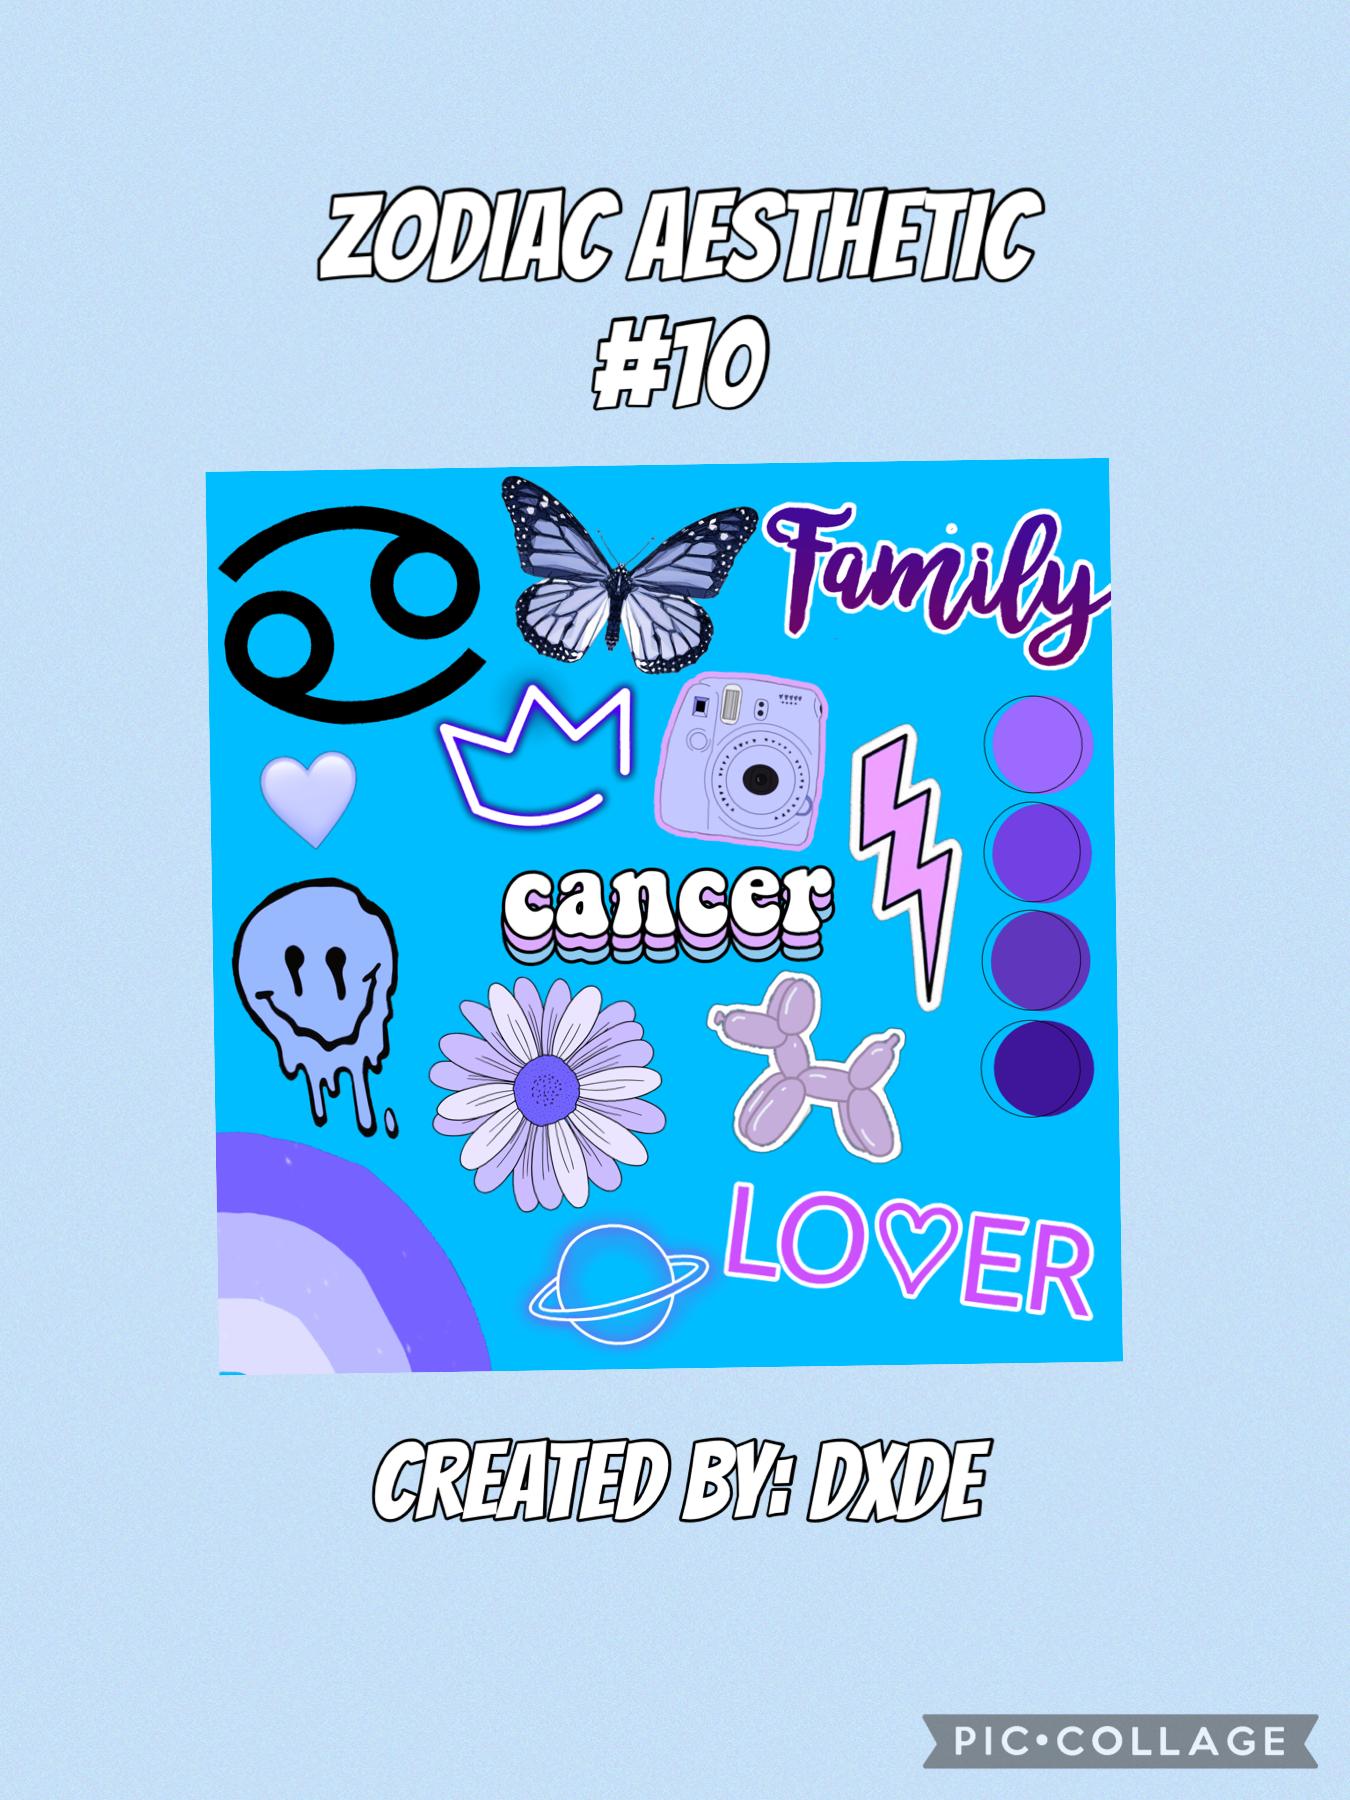 Enjoy this Aesthetic, Different Zodiacs coming soon! #cancer♋️